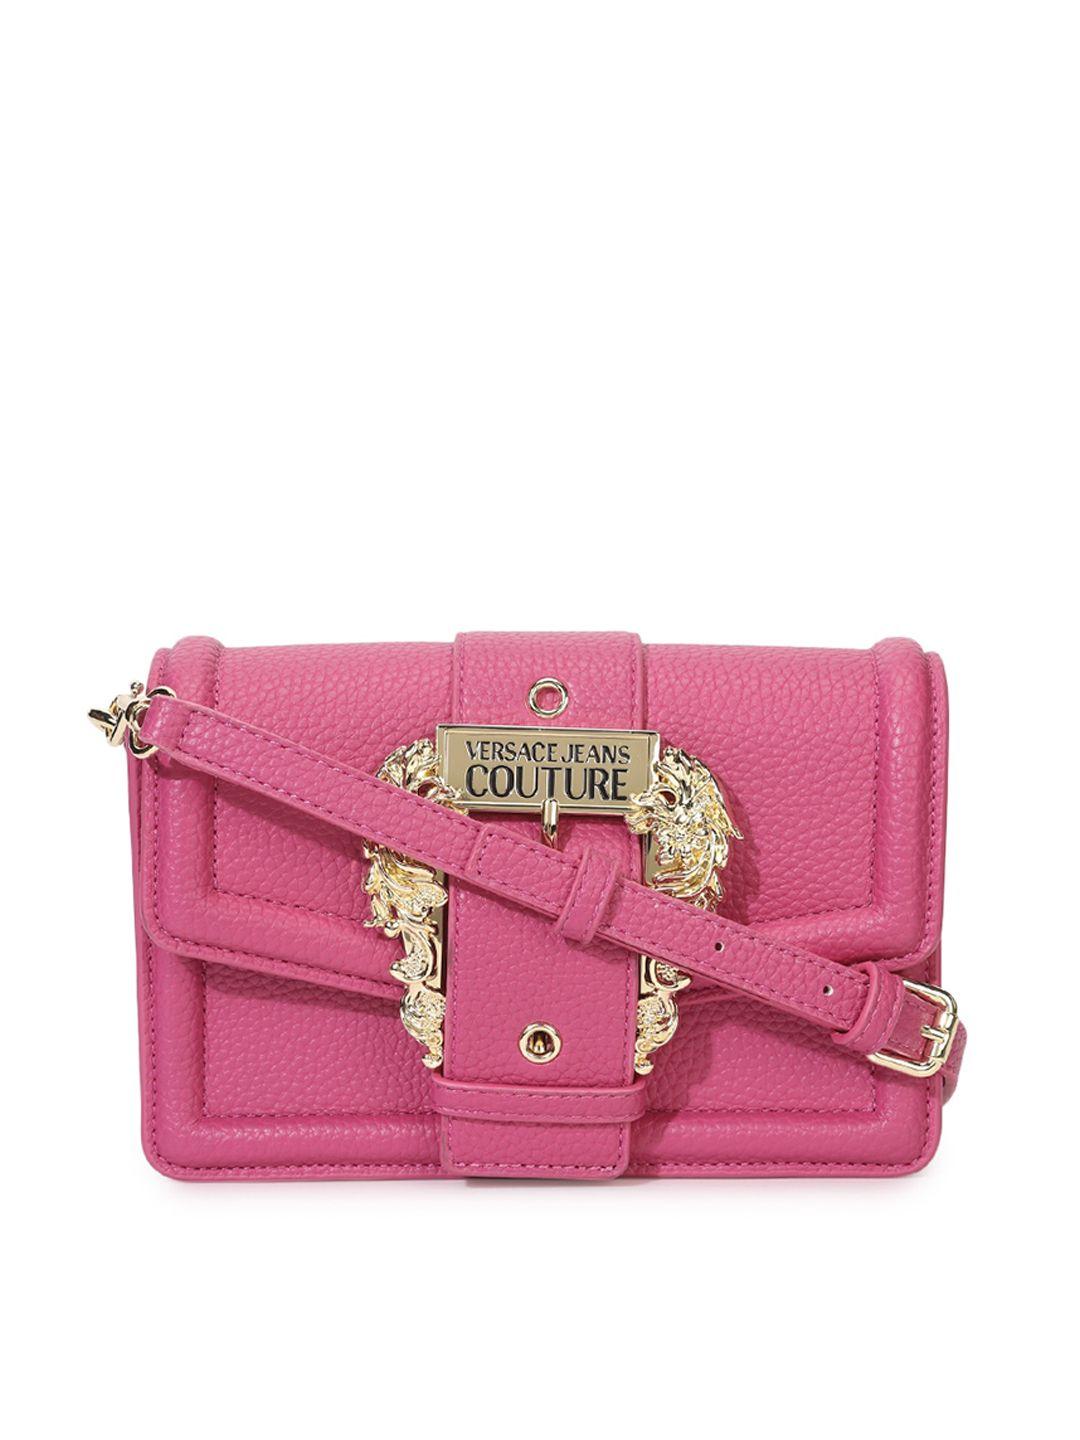 versace jeans couture structured sling bag with embellished detail